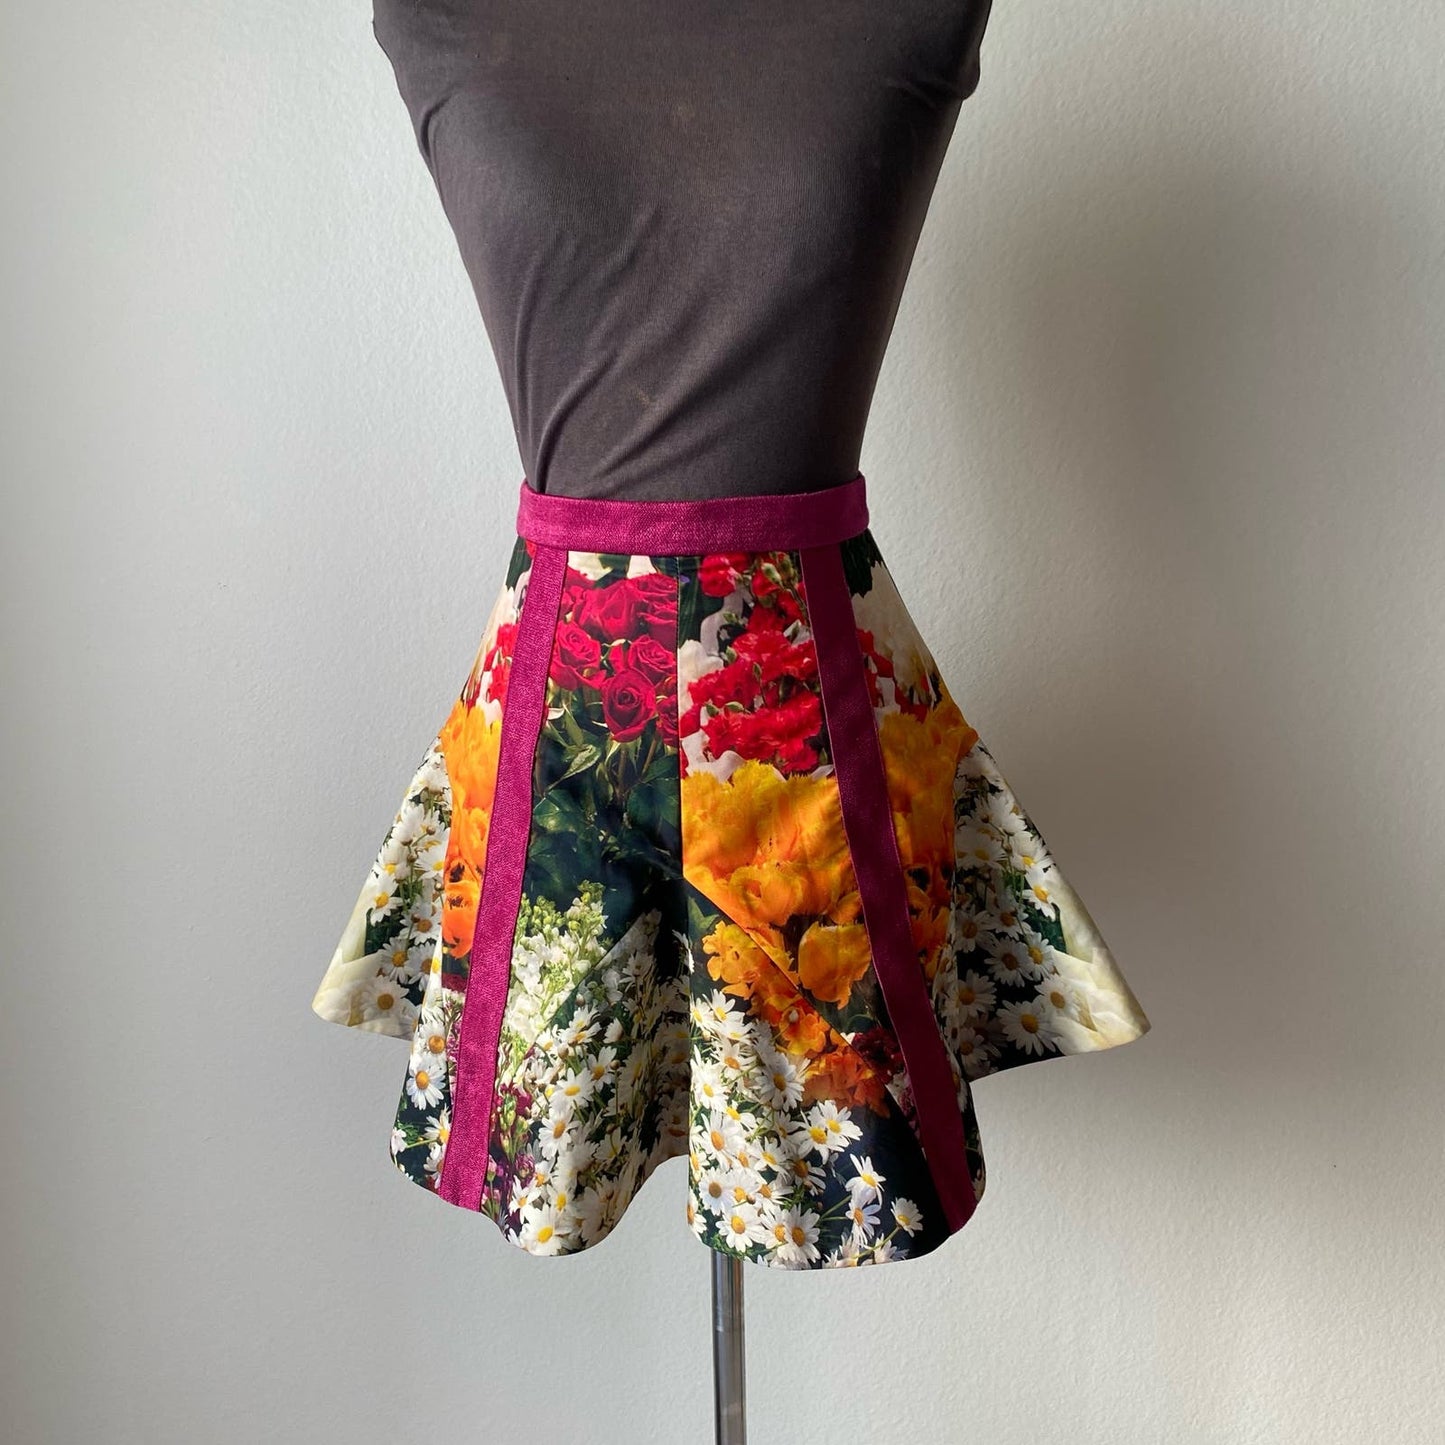 Cameo S floral flare mini skirt NWOT